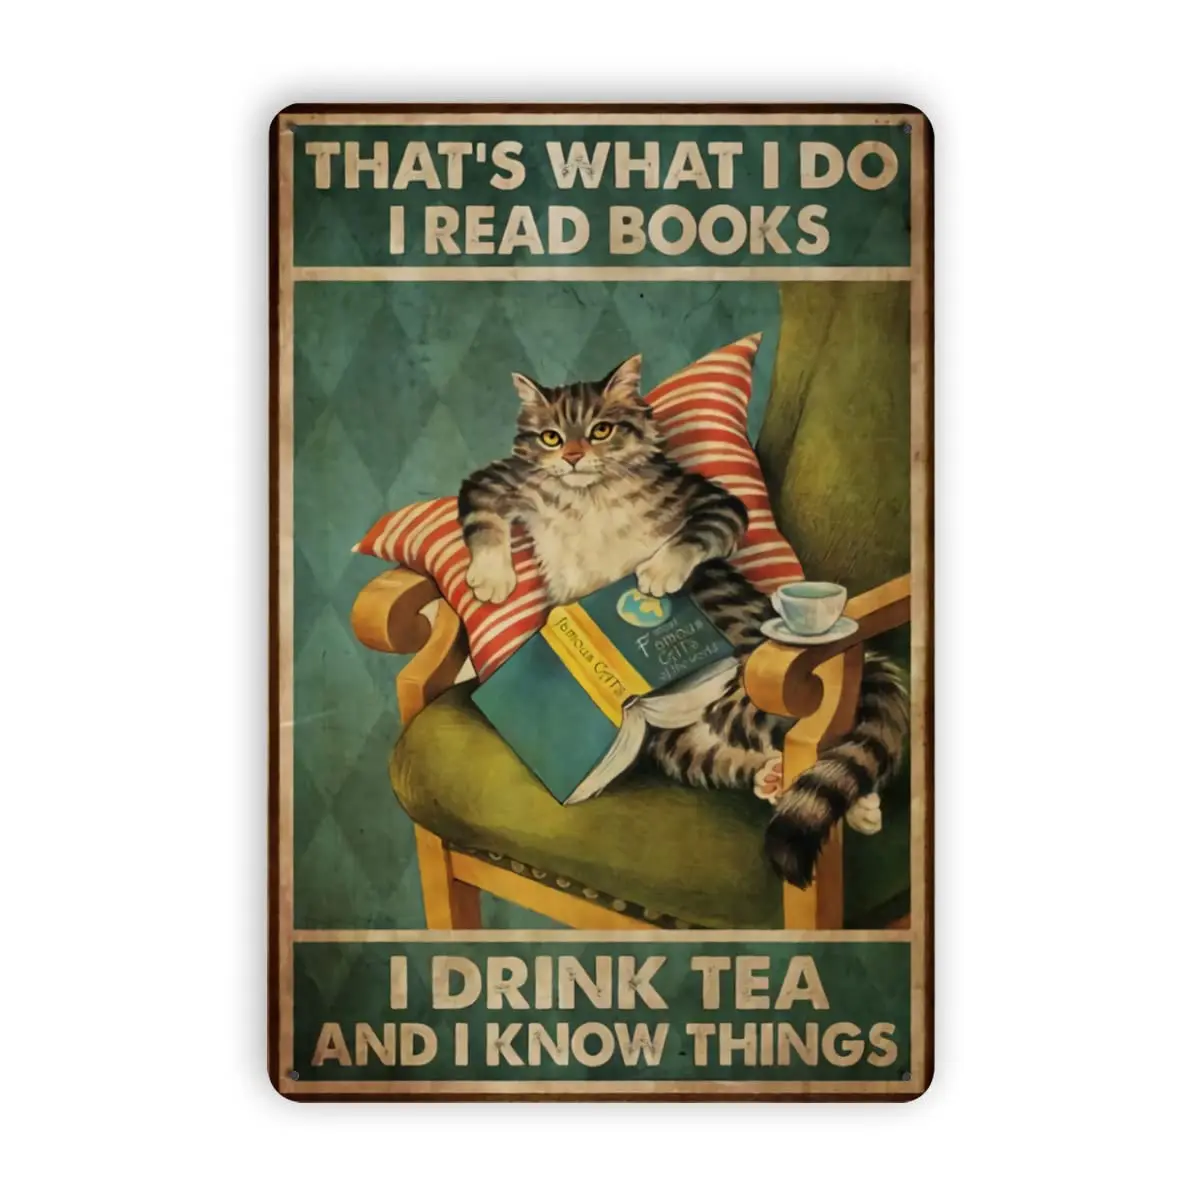 

Cat Metal Wall Art Decor Cat On Chair That's What I Do I Read Books I Drink Tea And I Know Things Cat Metal Wall Decor 8X12